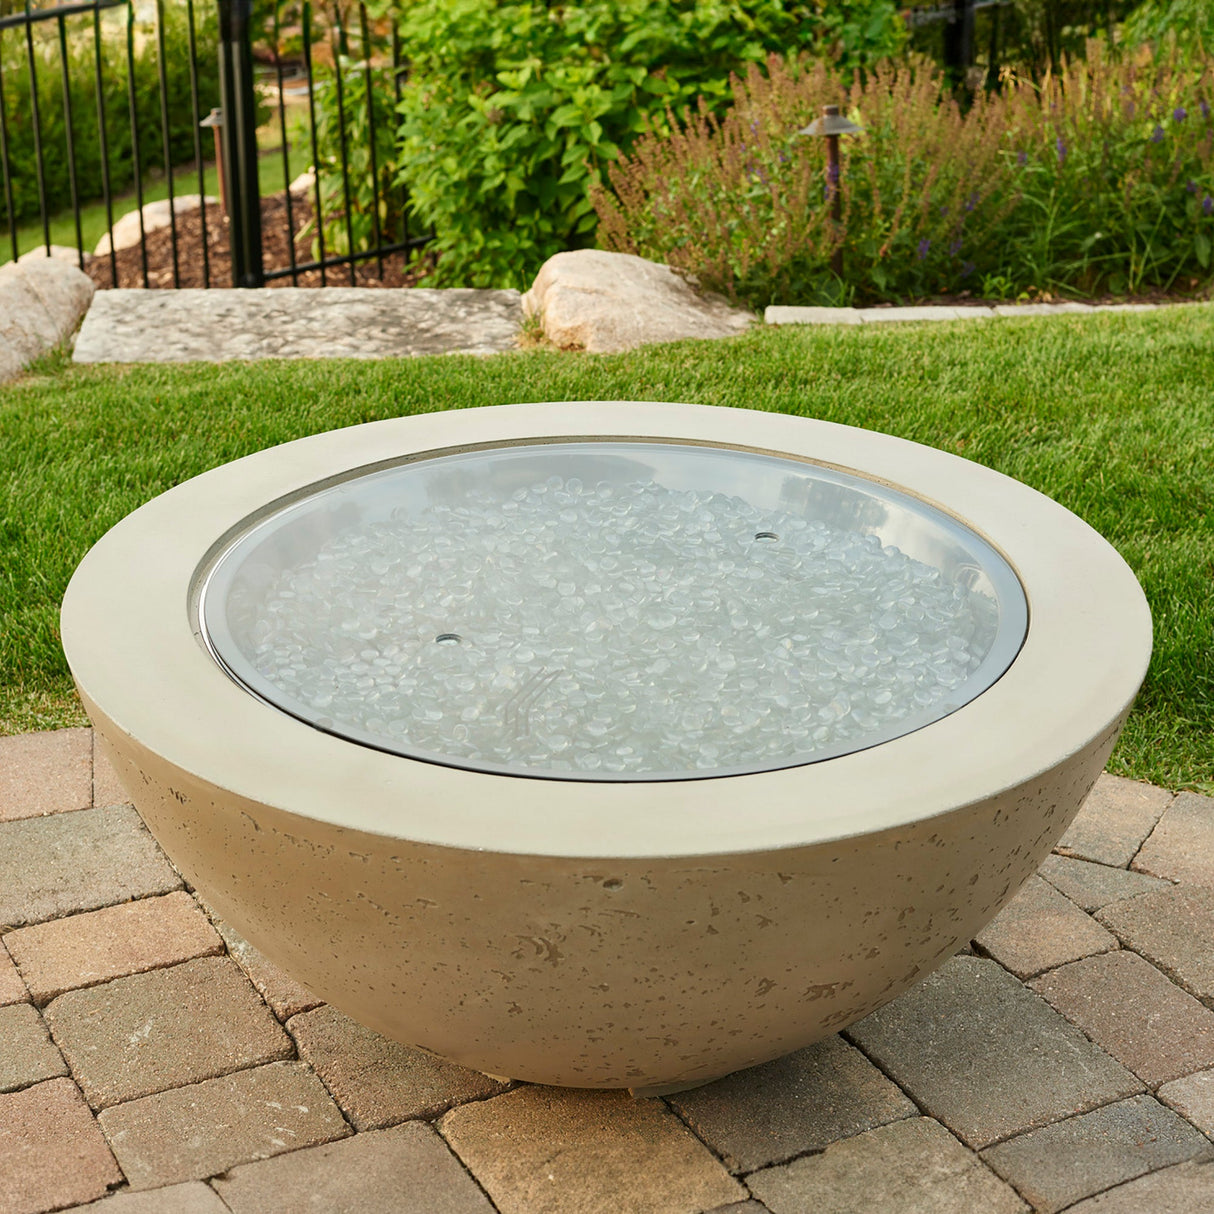 The 30" Round Glass Burner Cover covering a fire pit bowl